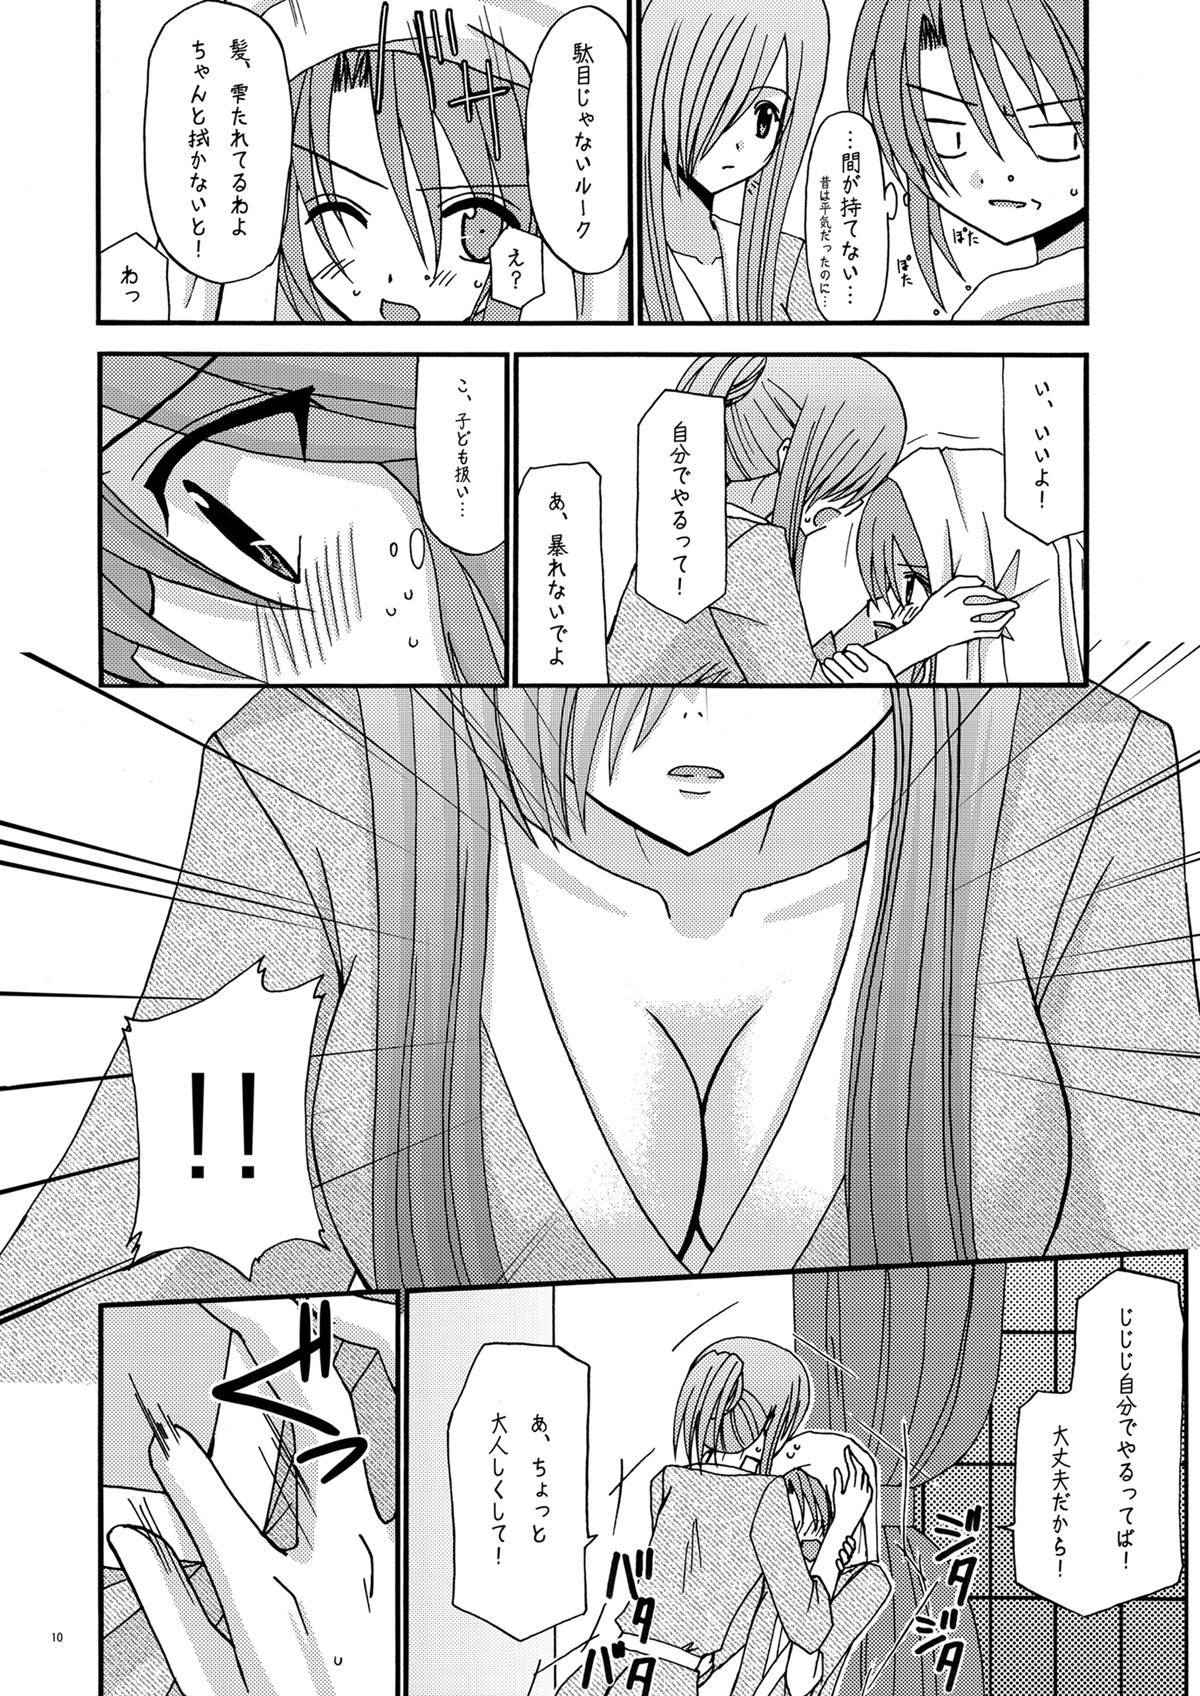 Sucking Dicks Tear Luke! - Tales of the abyss Blowjob - Page 10